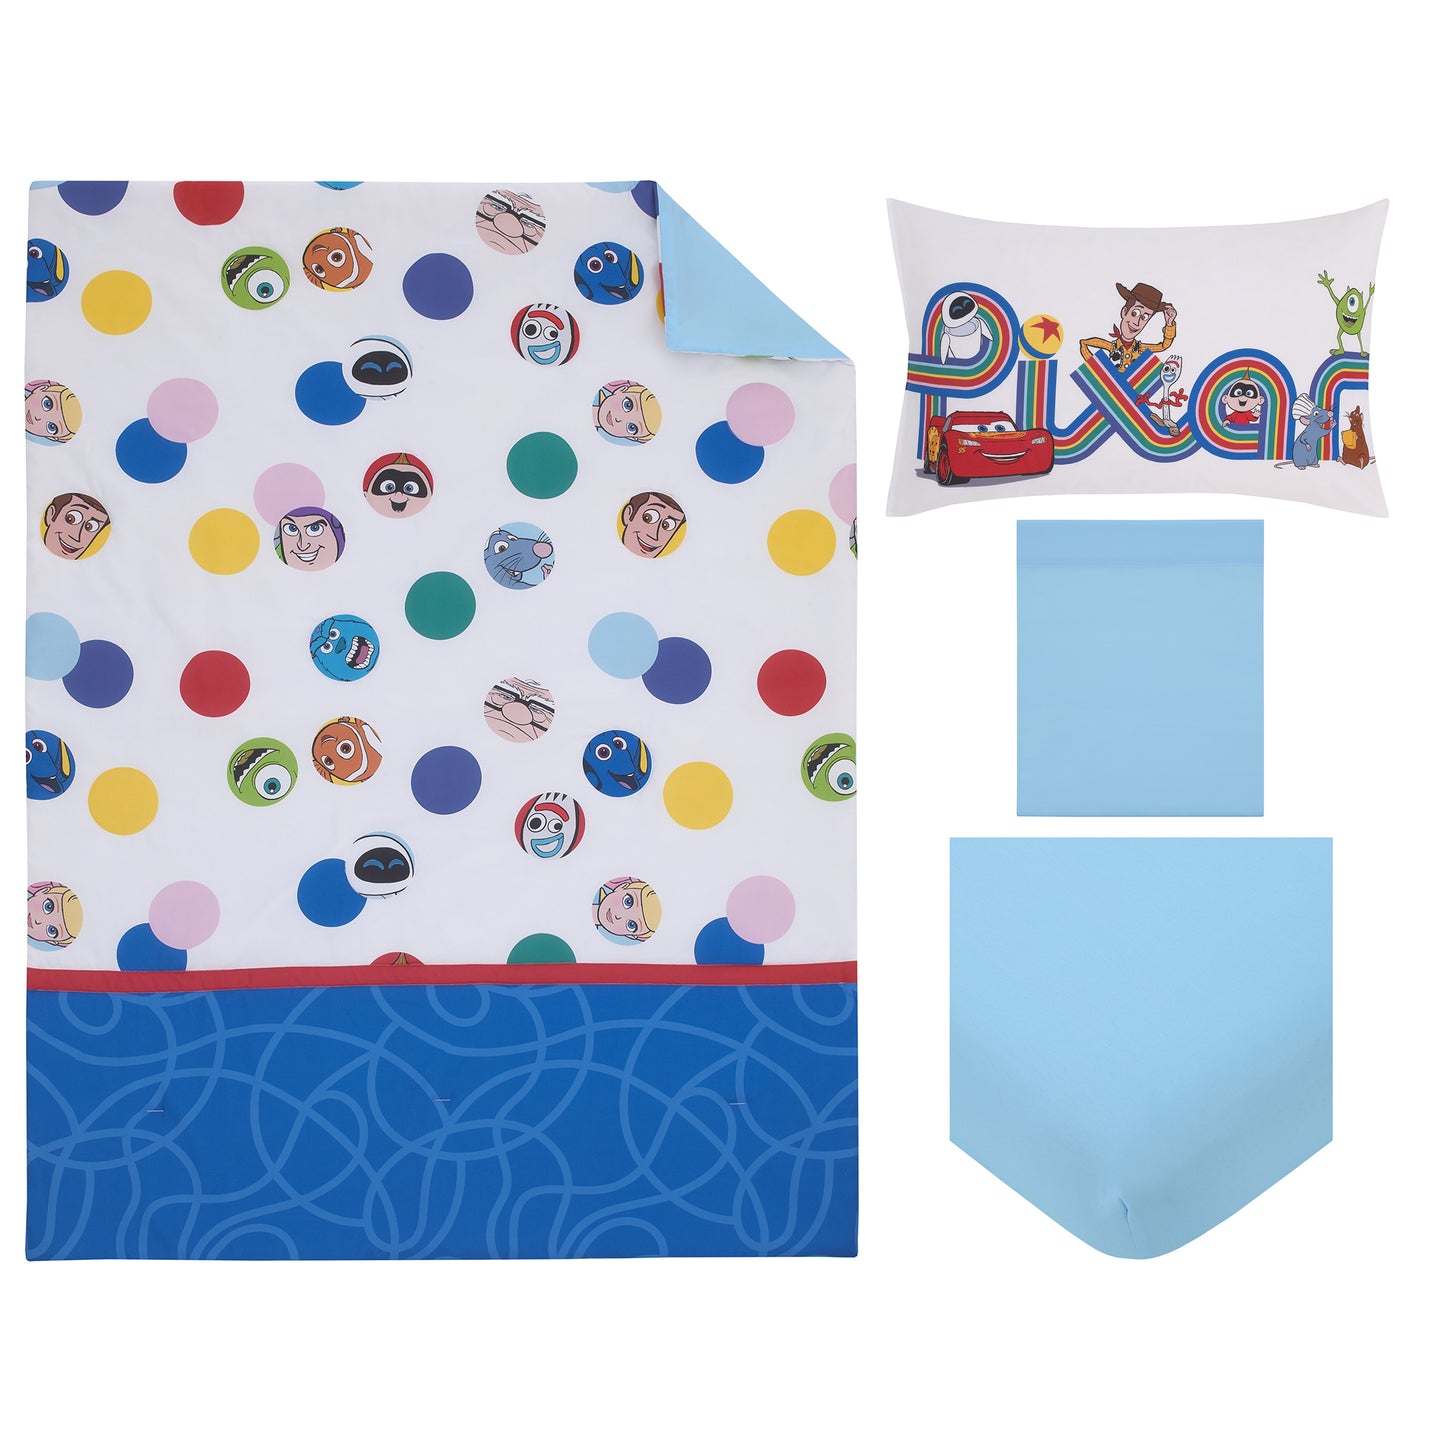 Disney Choose Happy Pixar Friends Multi-Colored 4 Piece Toddler Bed Set - Comforter, Fitted Bottom Sheet, Flat Top Sheet, and Reversible Pillowcase